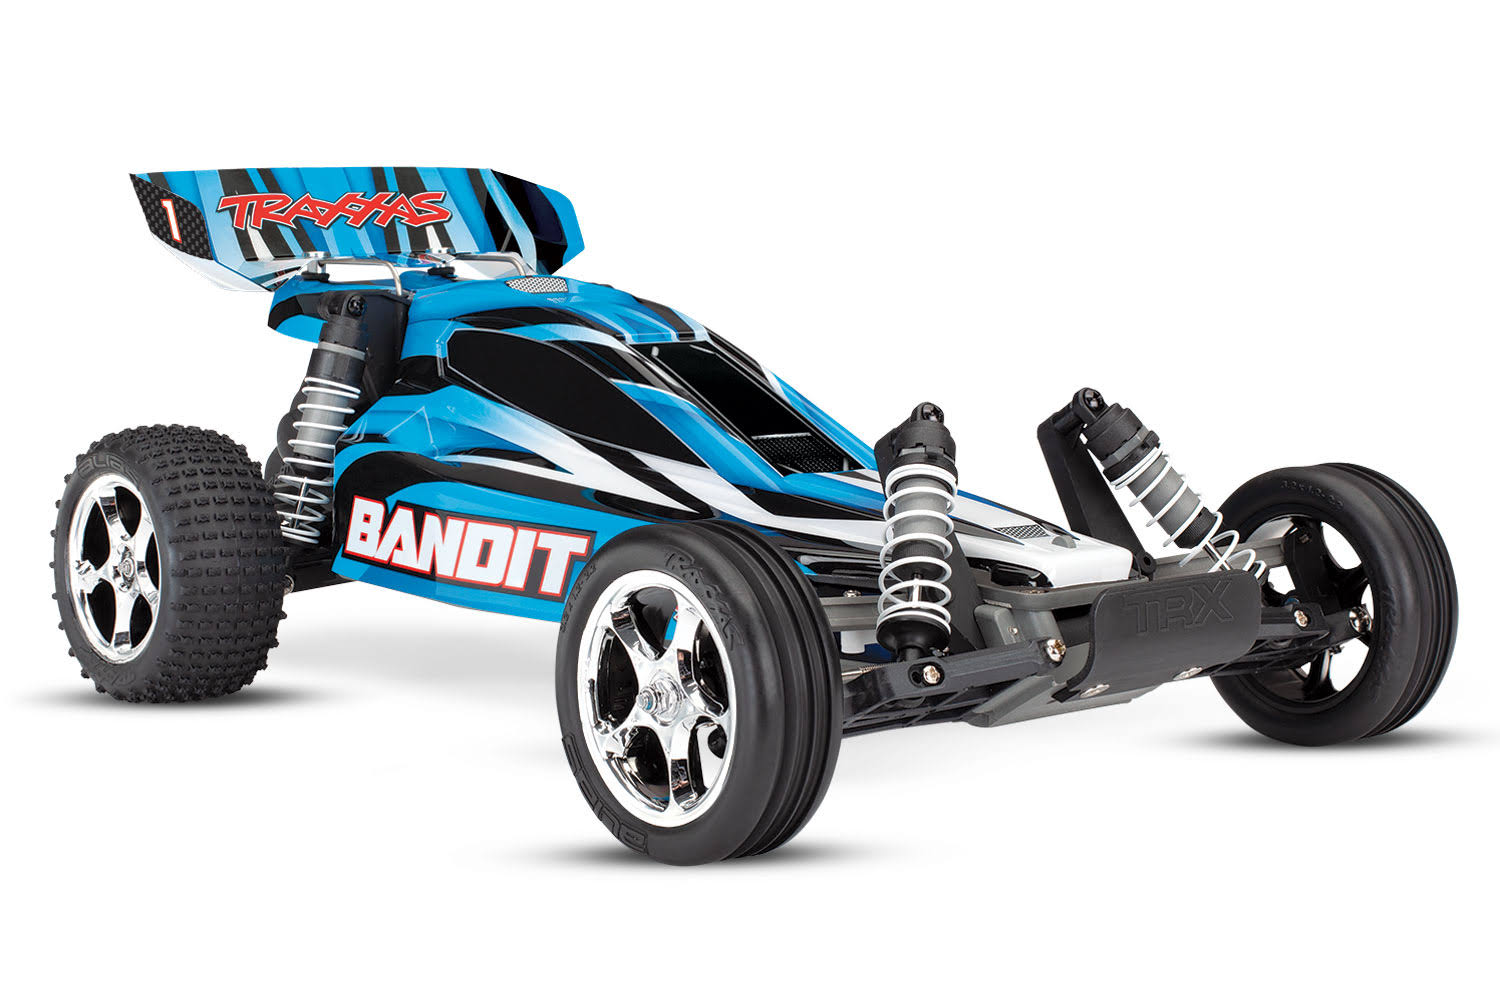 Traxxas Bandit 2WD 1/10 RTR TQ with Battery & Charger (Red)